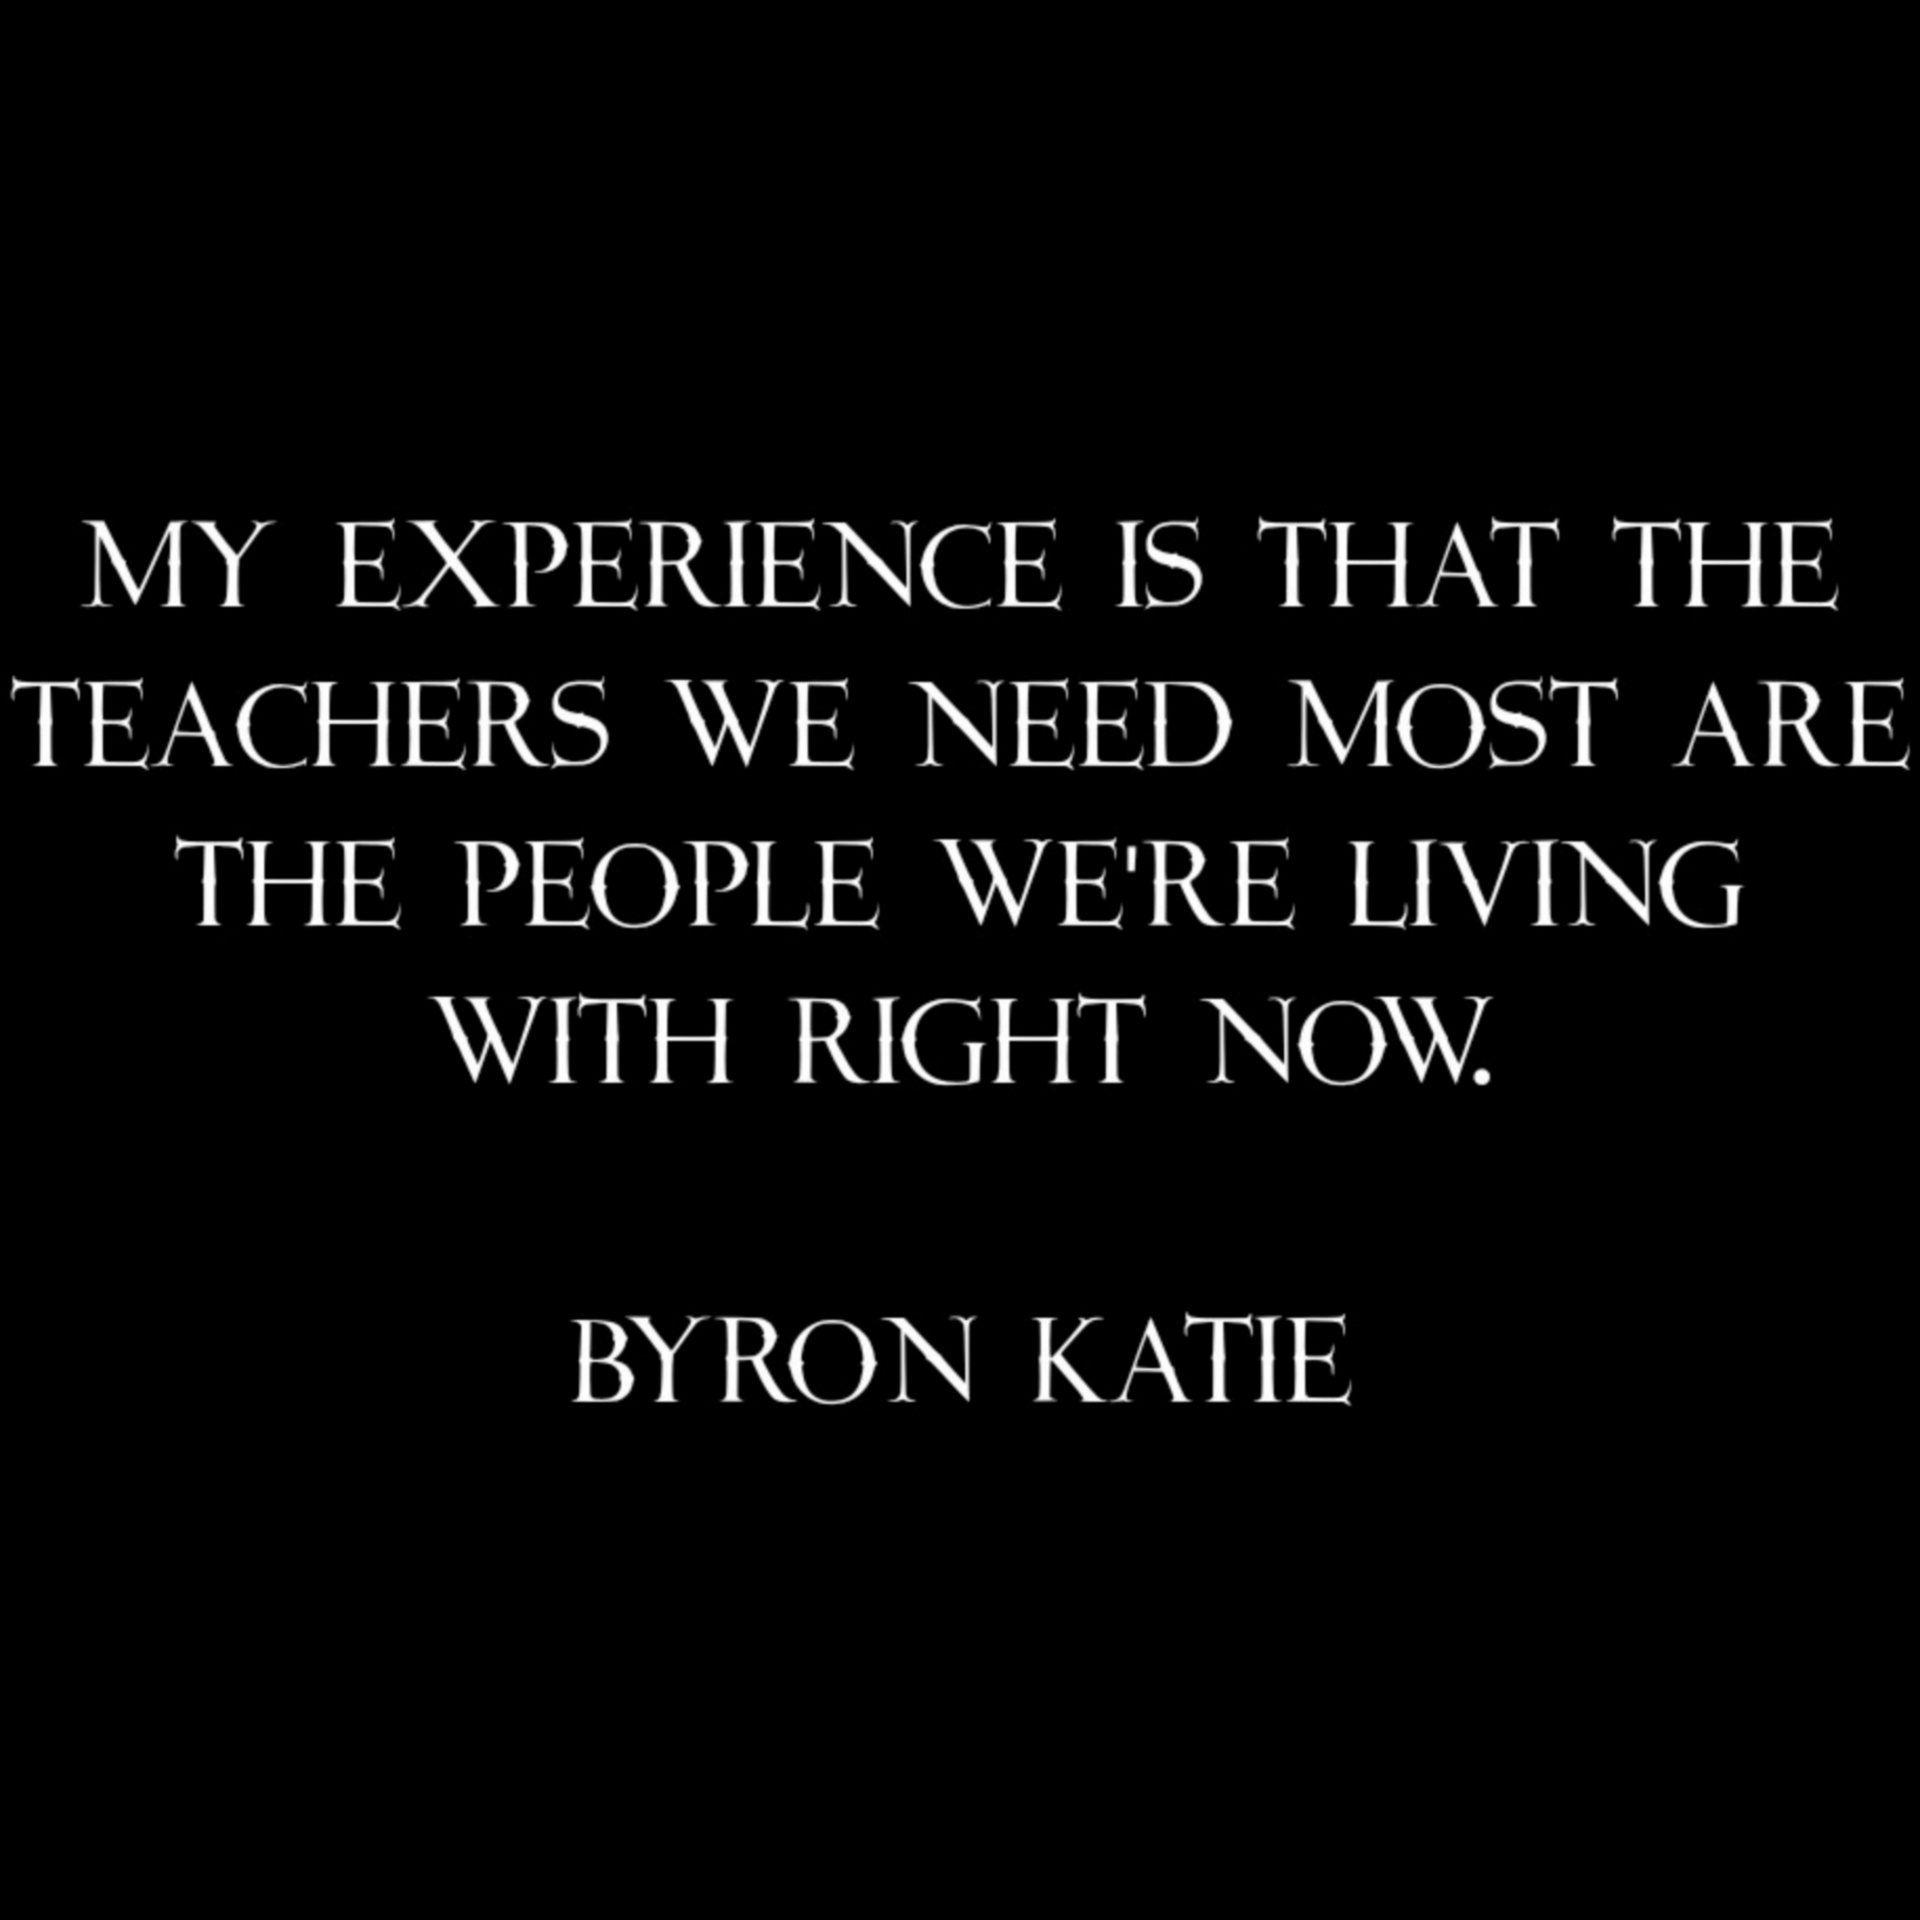 My experience is that the teachers we need most are the people we're living with right now. Byron Katie